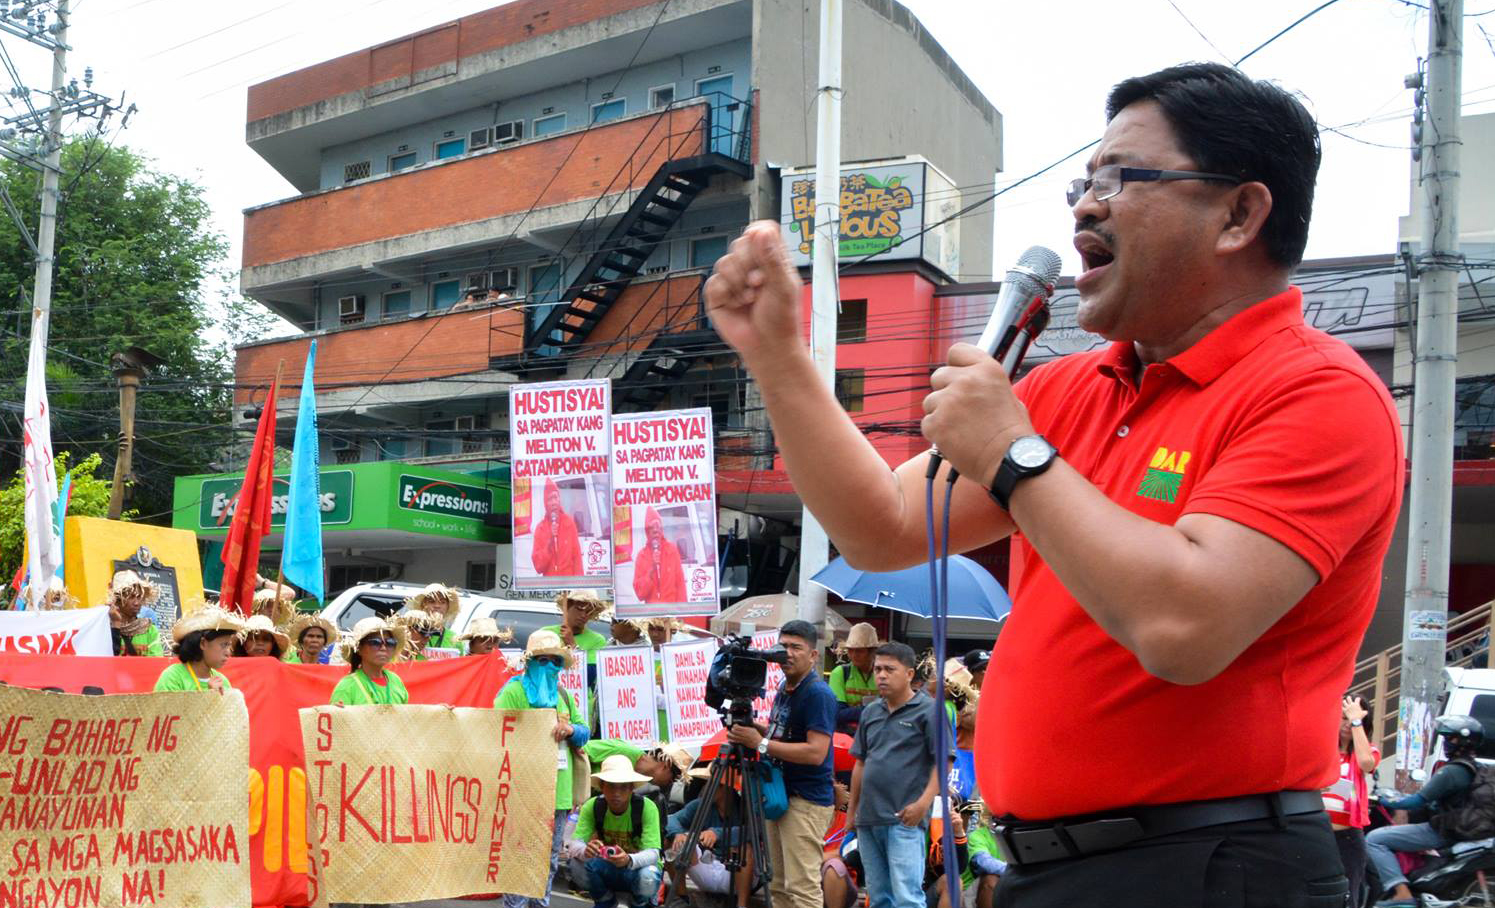 For decades, Mariano – affectionately known to supporters as “Ka Paeng” – was a leader of the militant Peasant Movement of the Philippines or KMP.